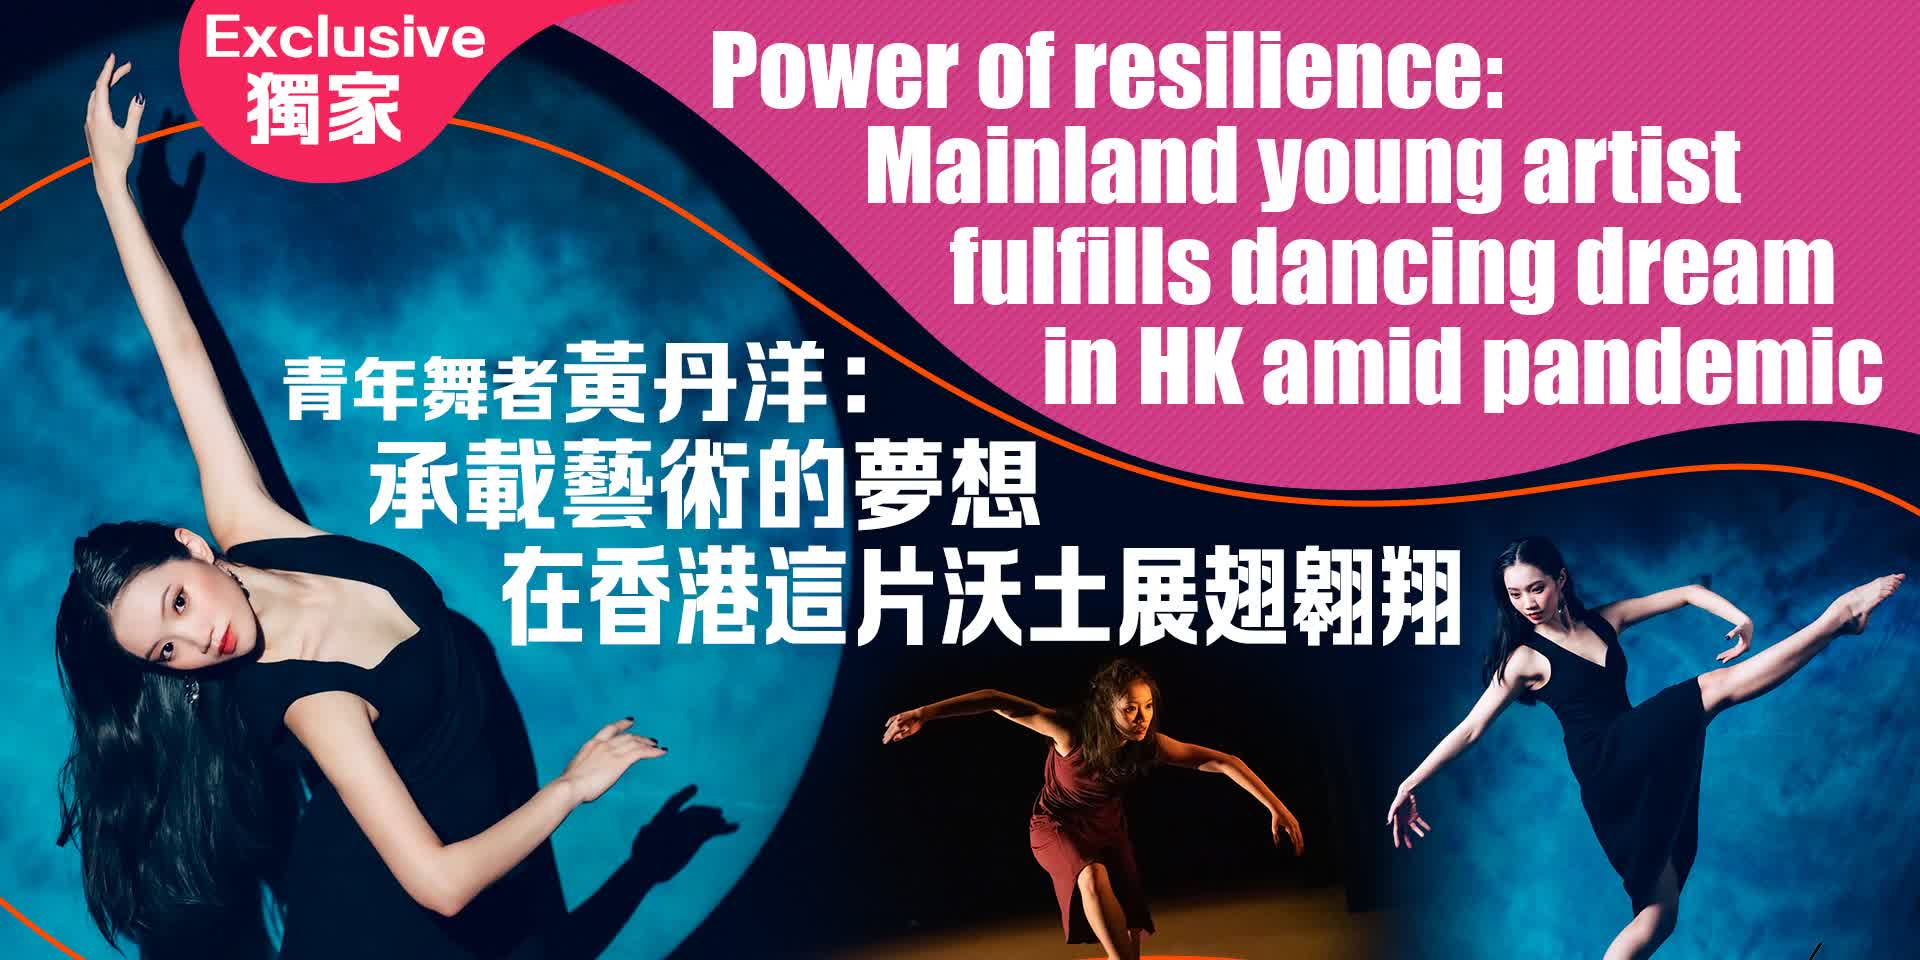 Exclusive | Power of resilience: Mainland young artist fulfills dancing dream in HK amid pandemic